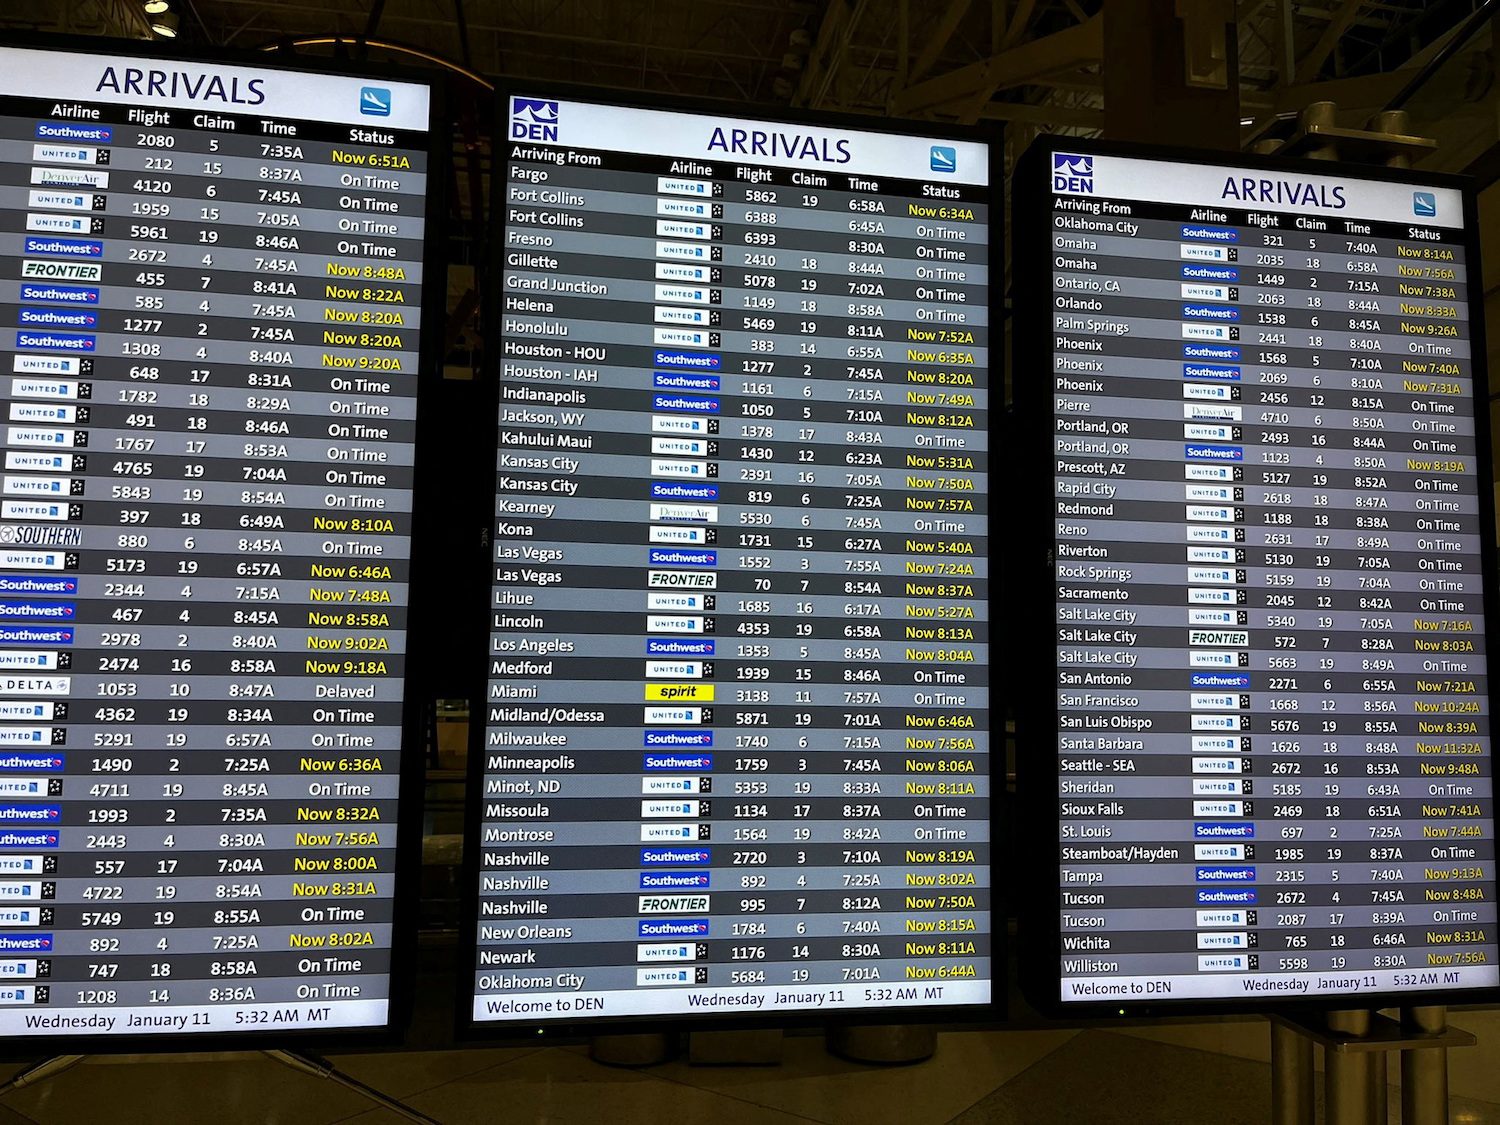 EXPLAINER: Why US flights were grounded by an FAA system outage